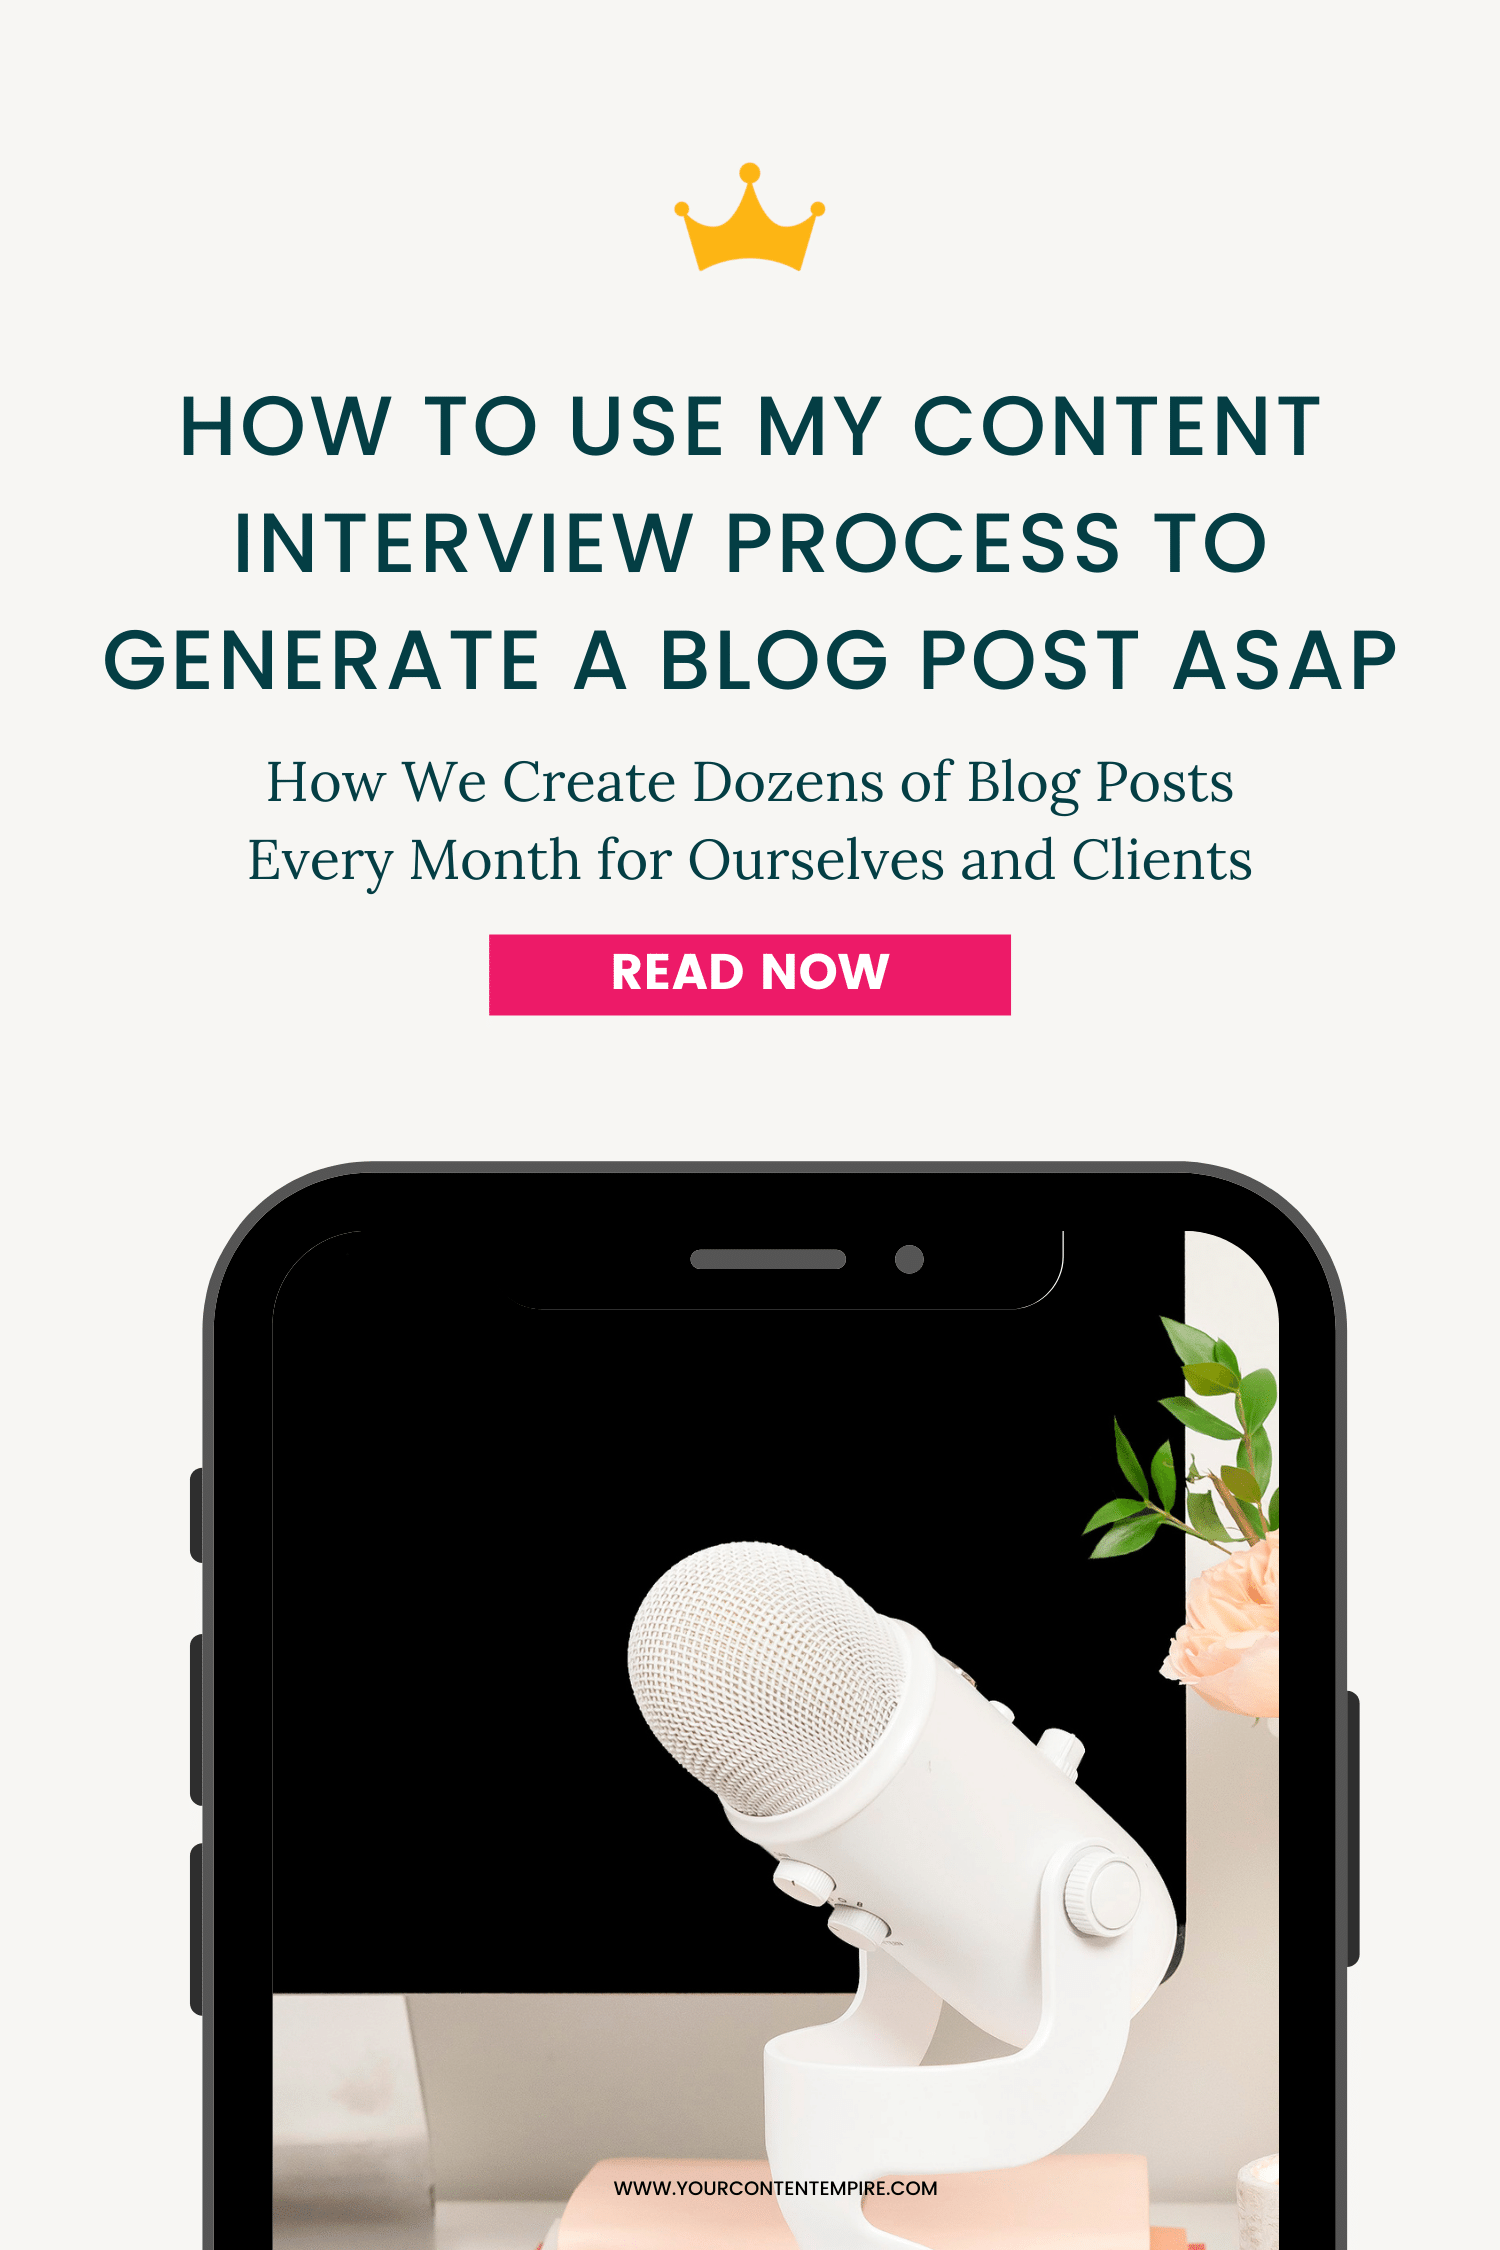 How to Use My Content Interview Process to Generate a Blog Post ASAP